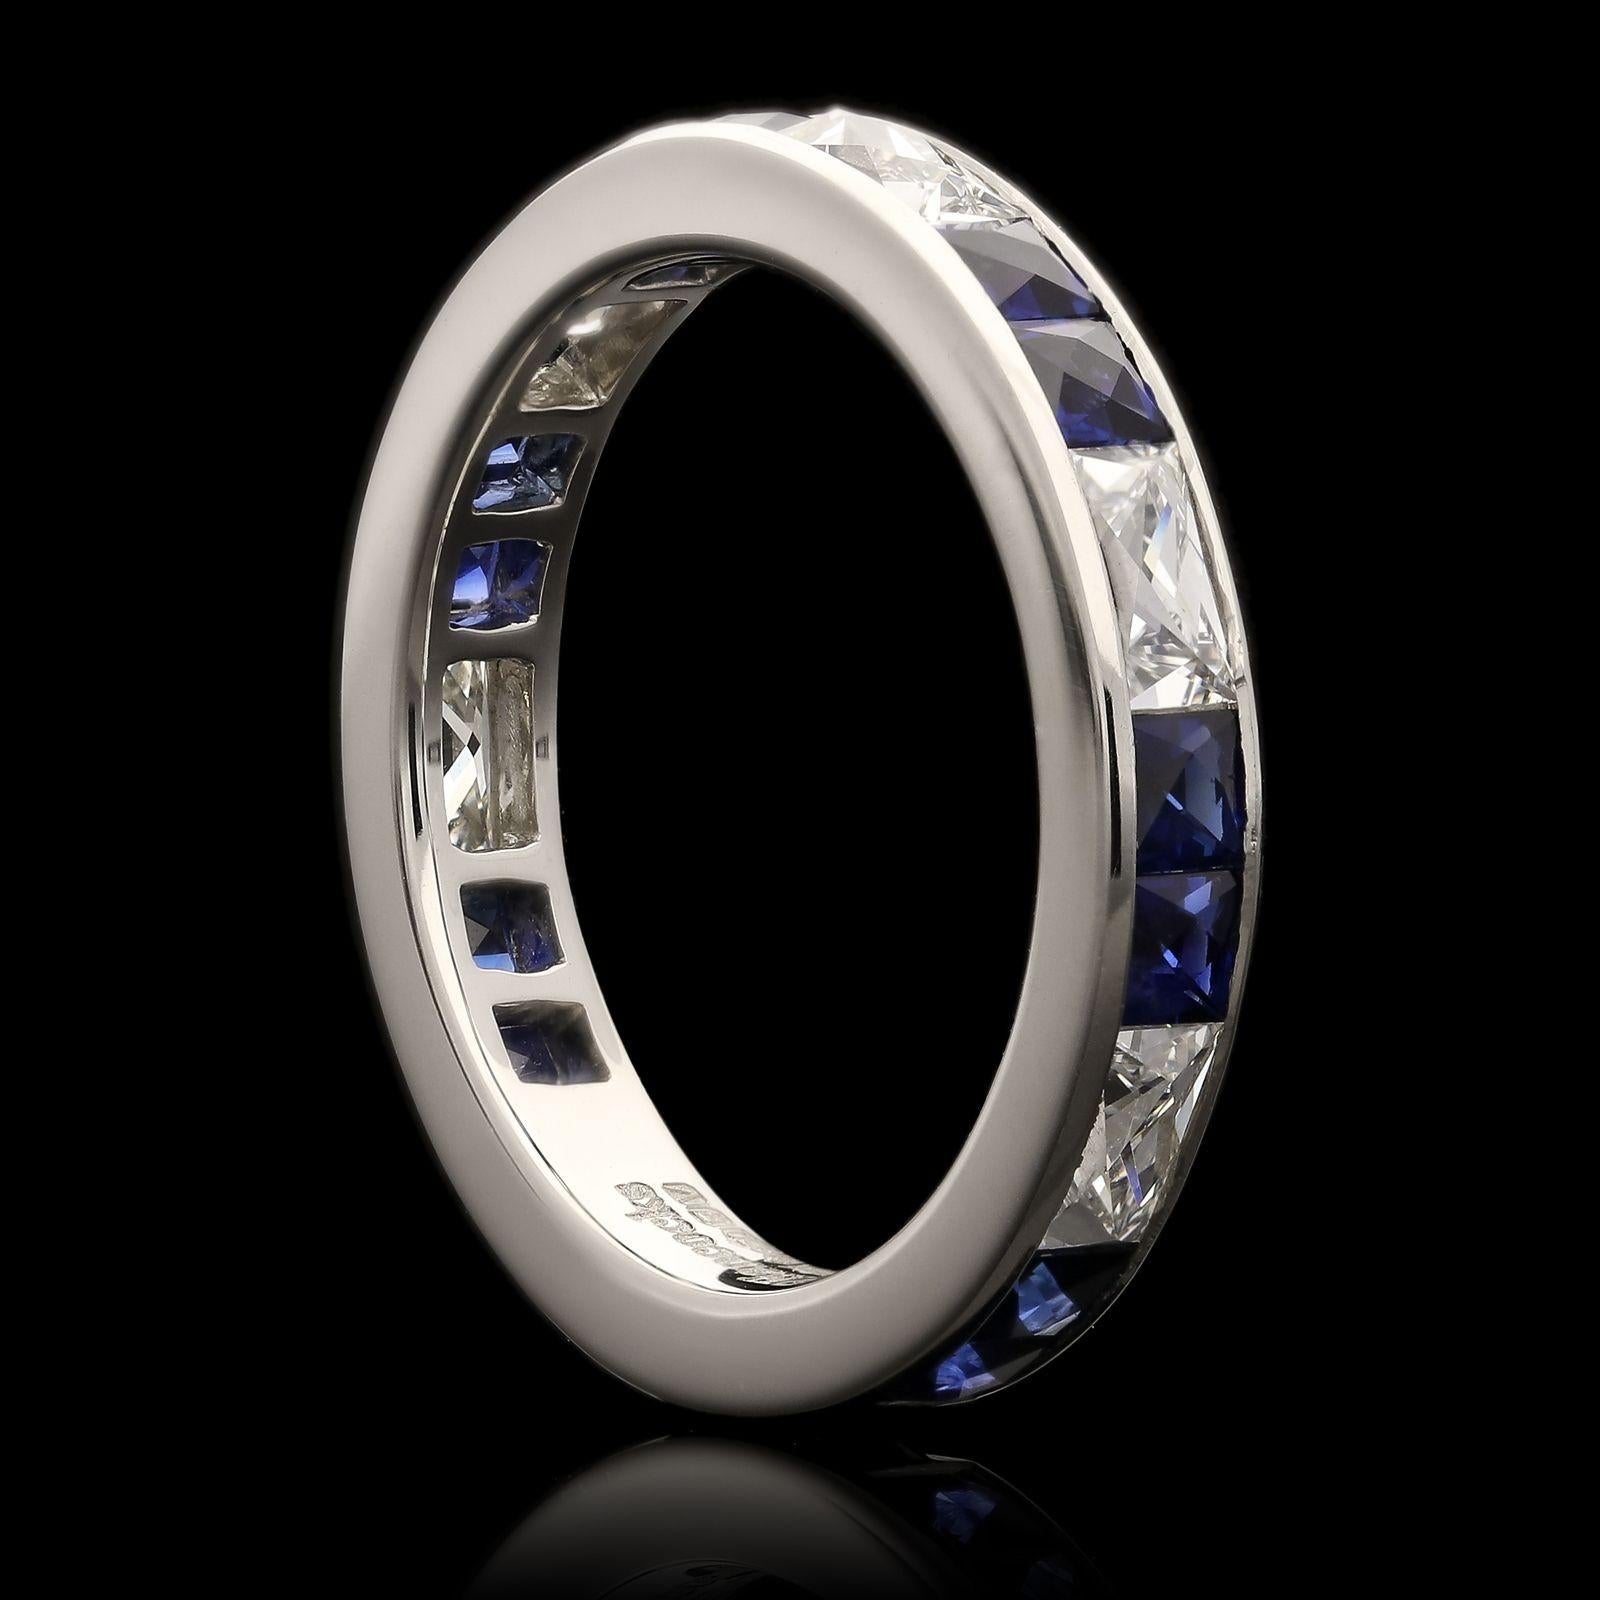 A beautiful and elegant French-cut diamond and sapphire eternity ring by Hancocks, set alternatively with one rectangular French cut diamond followed by two square French cut sapphires, all in a finely crafted platinum channel